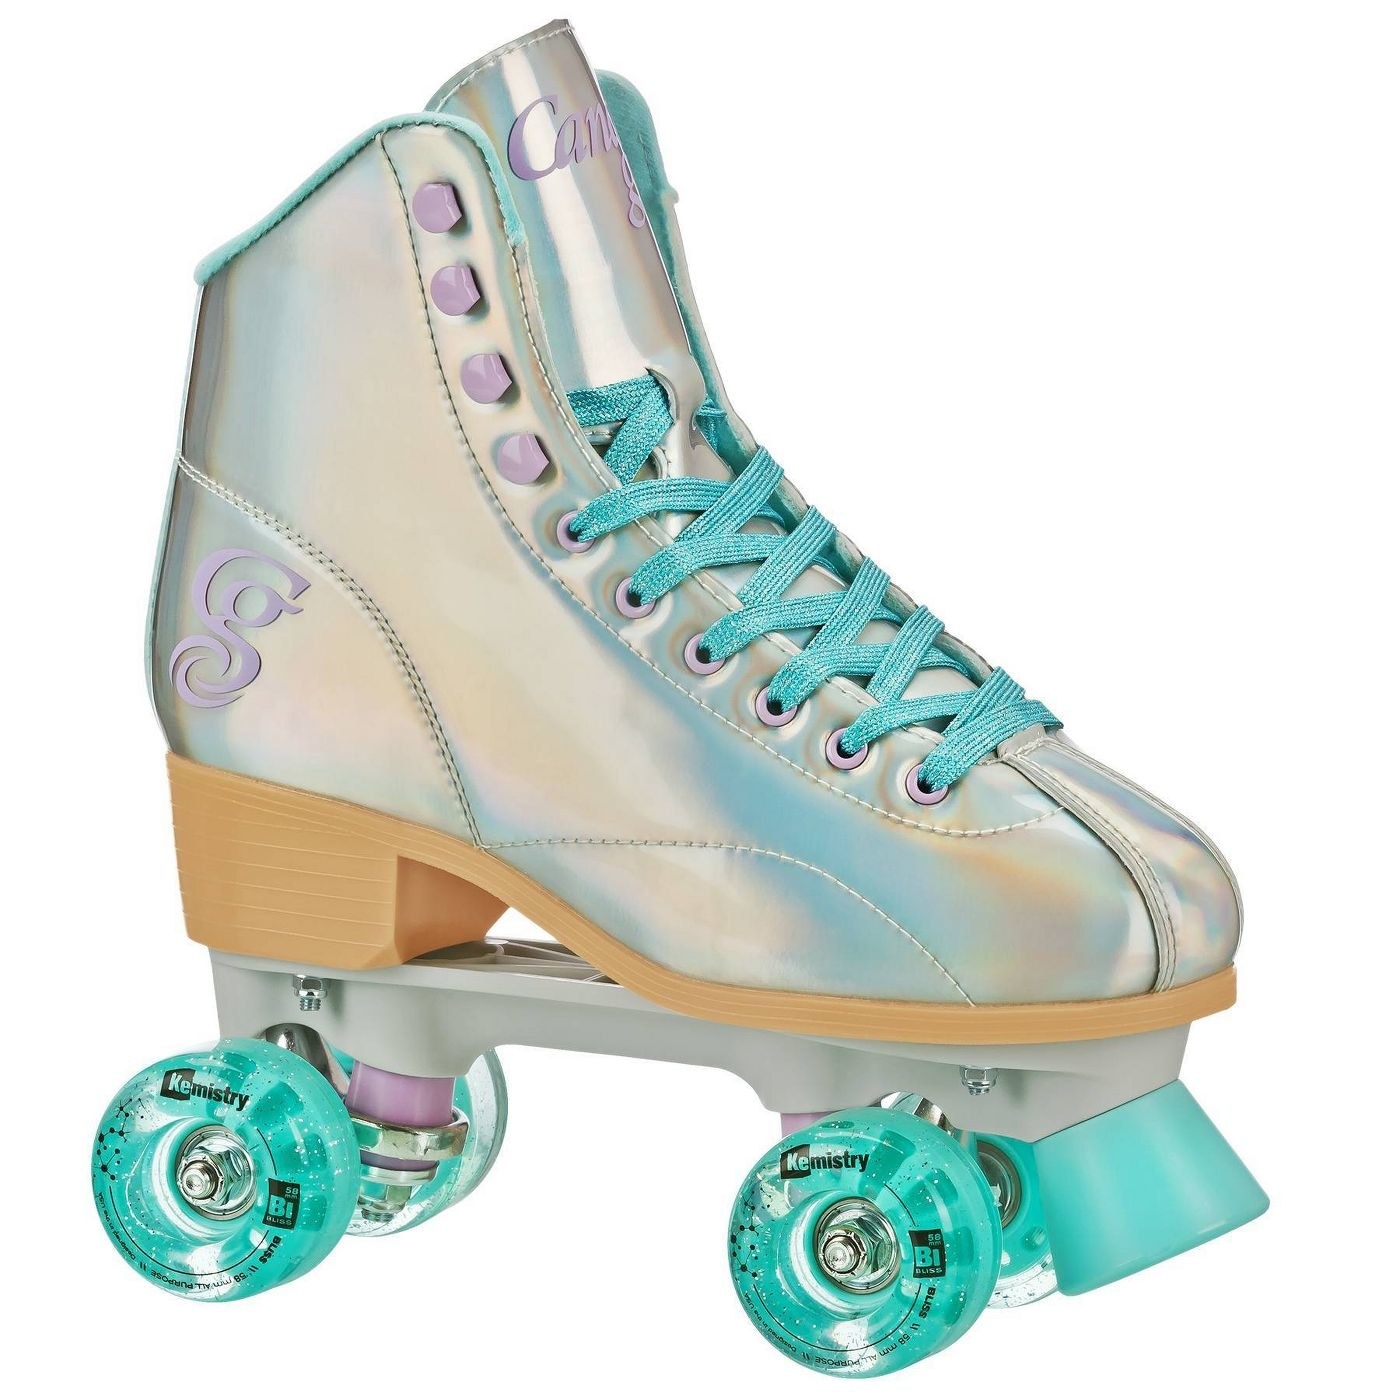 A silver roller skate with turquoise wheels and lacres